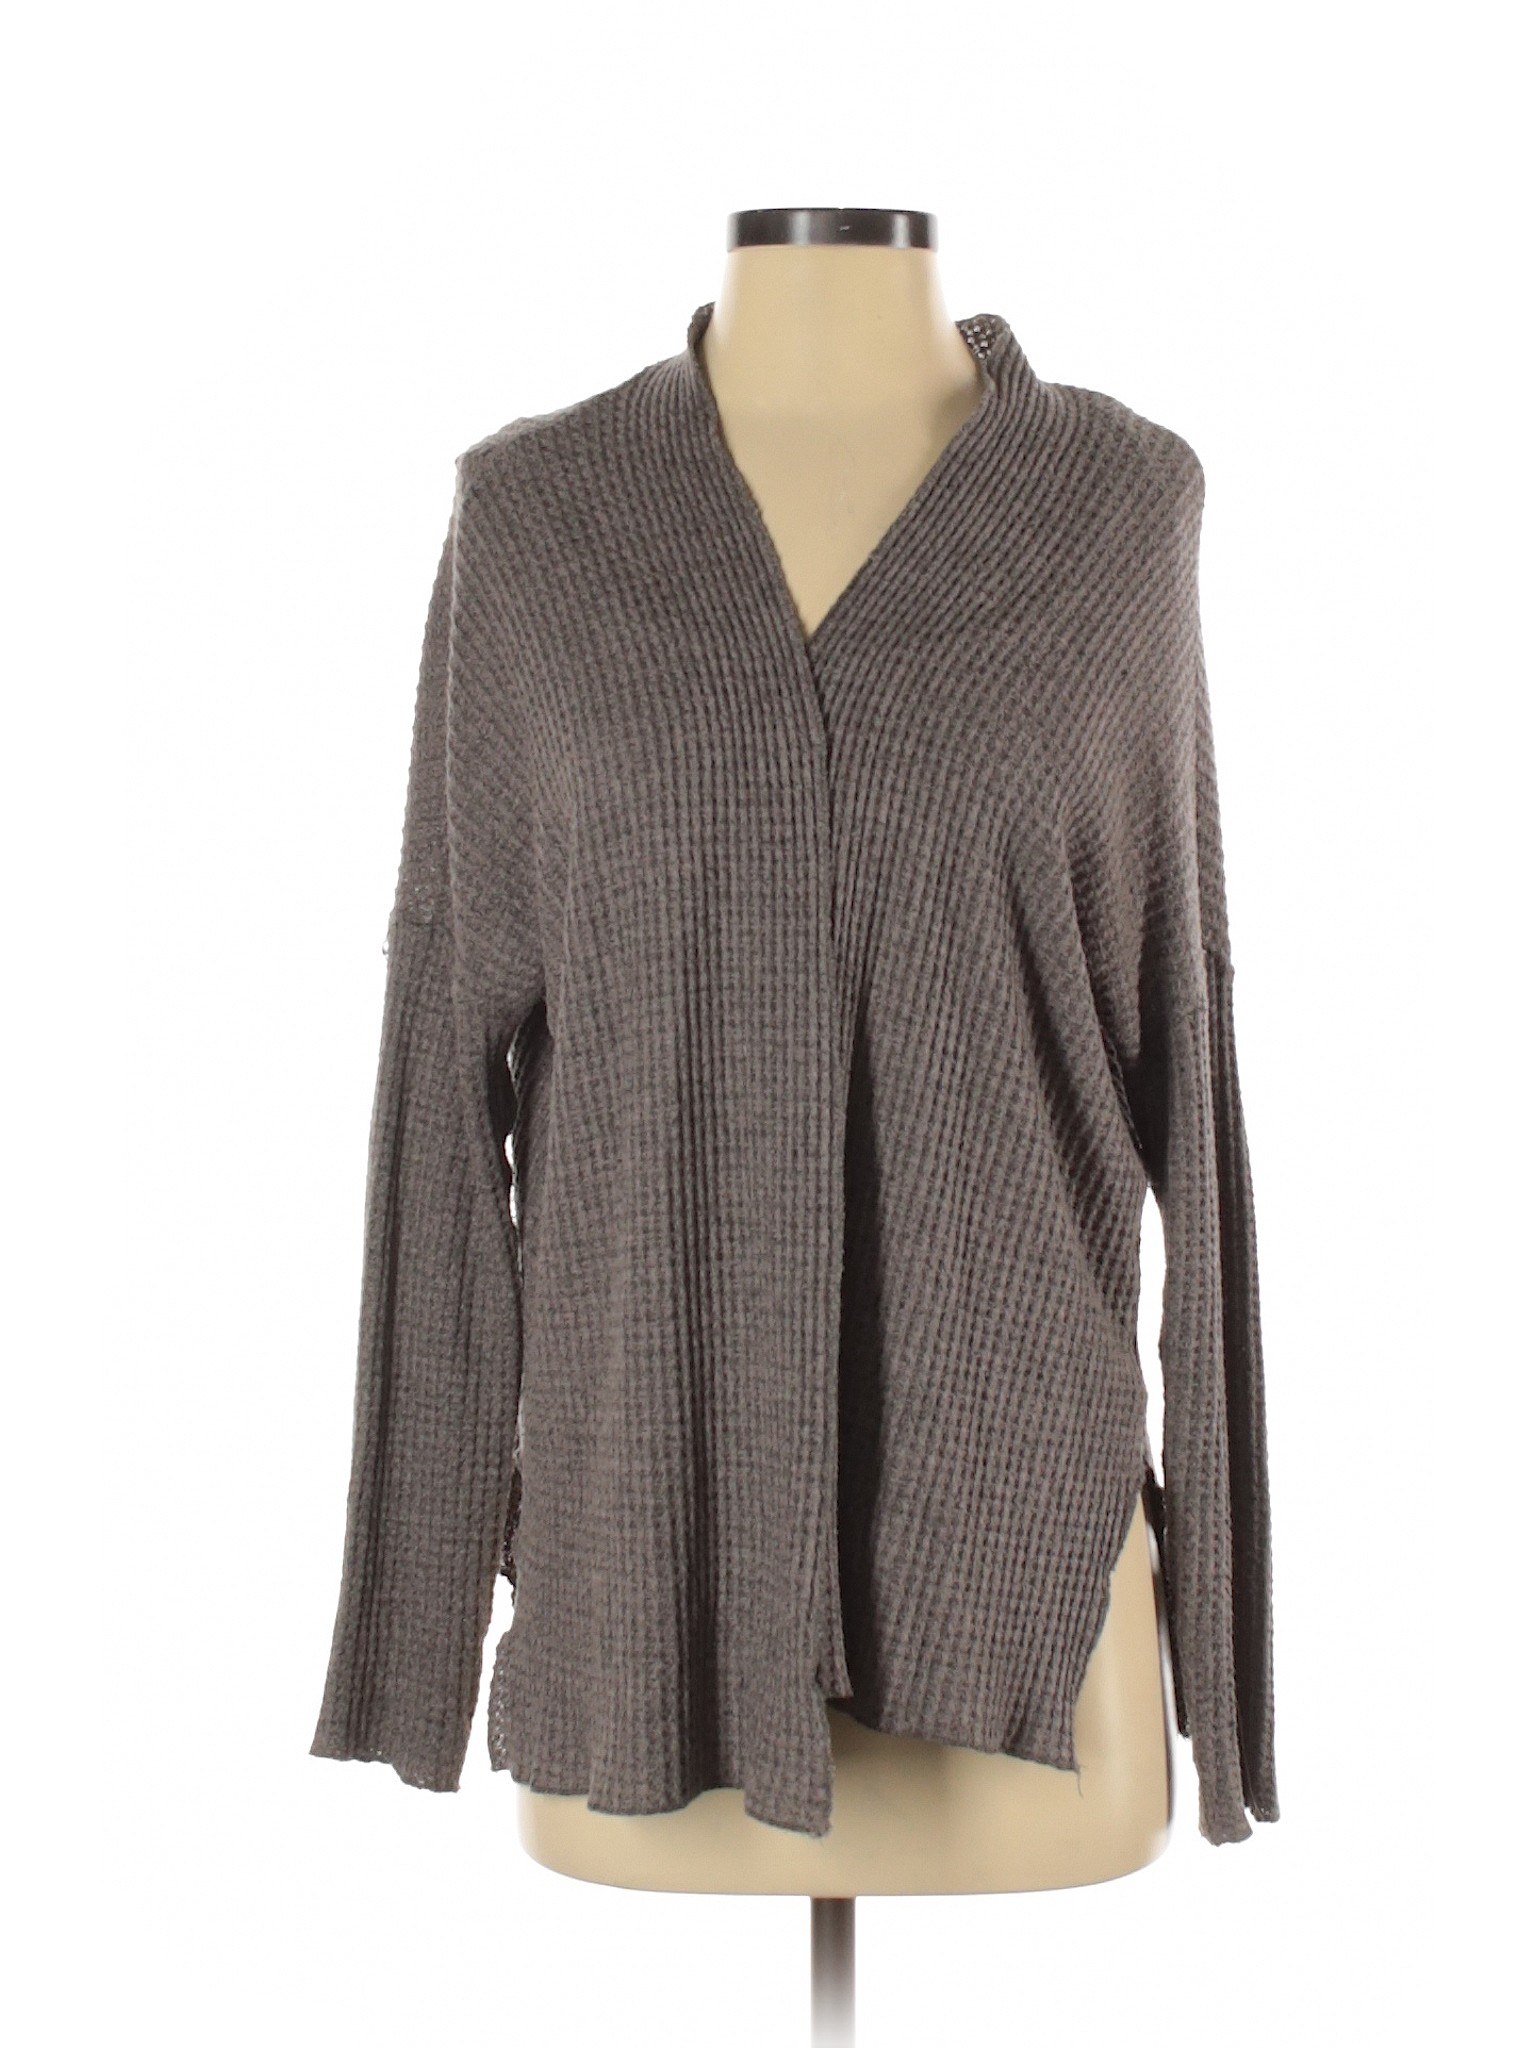 American Eagle Outfitters Women Gray Cardigan S | eBay